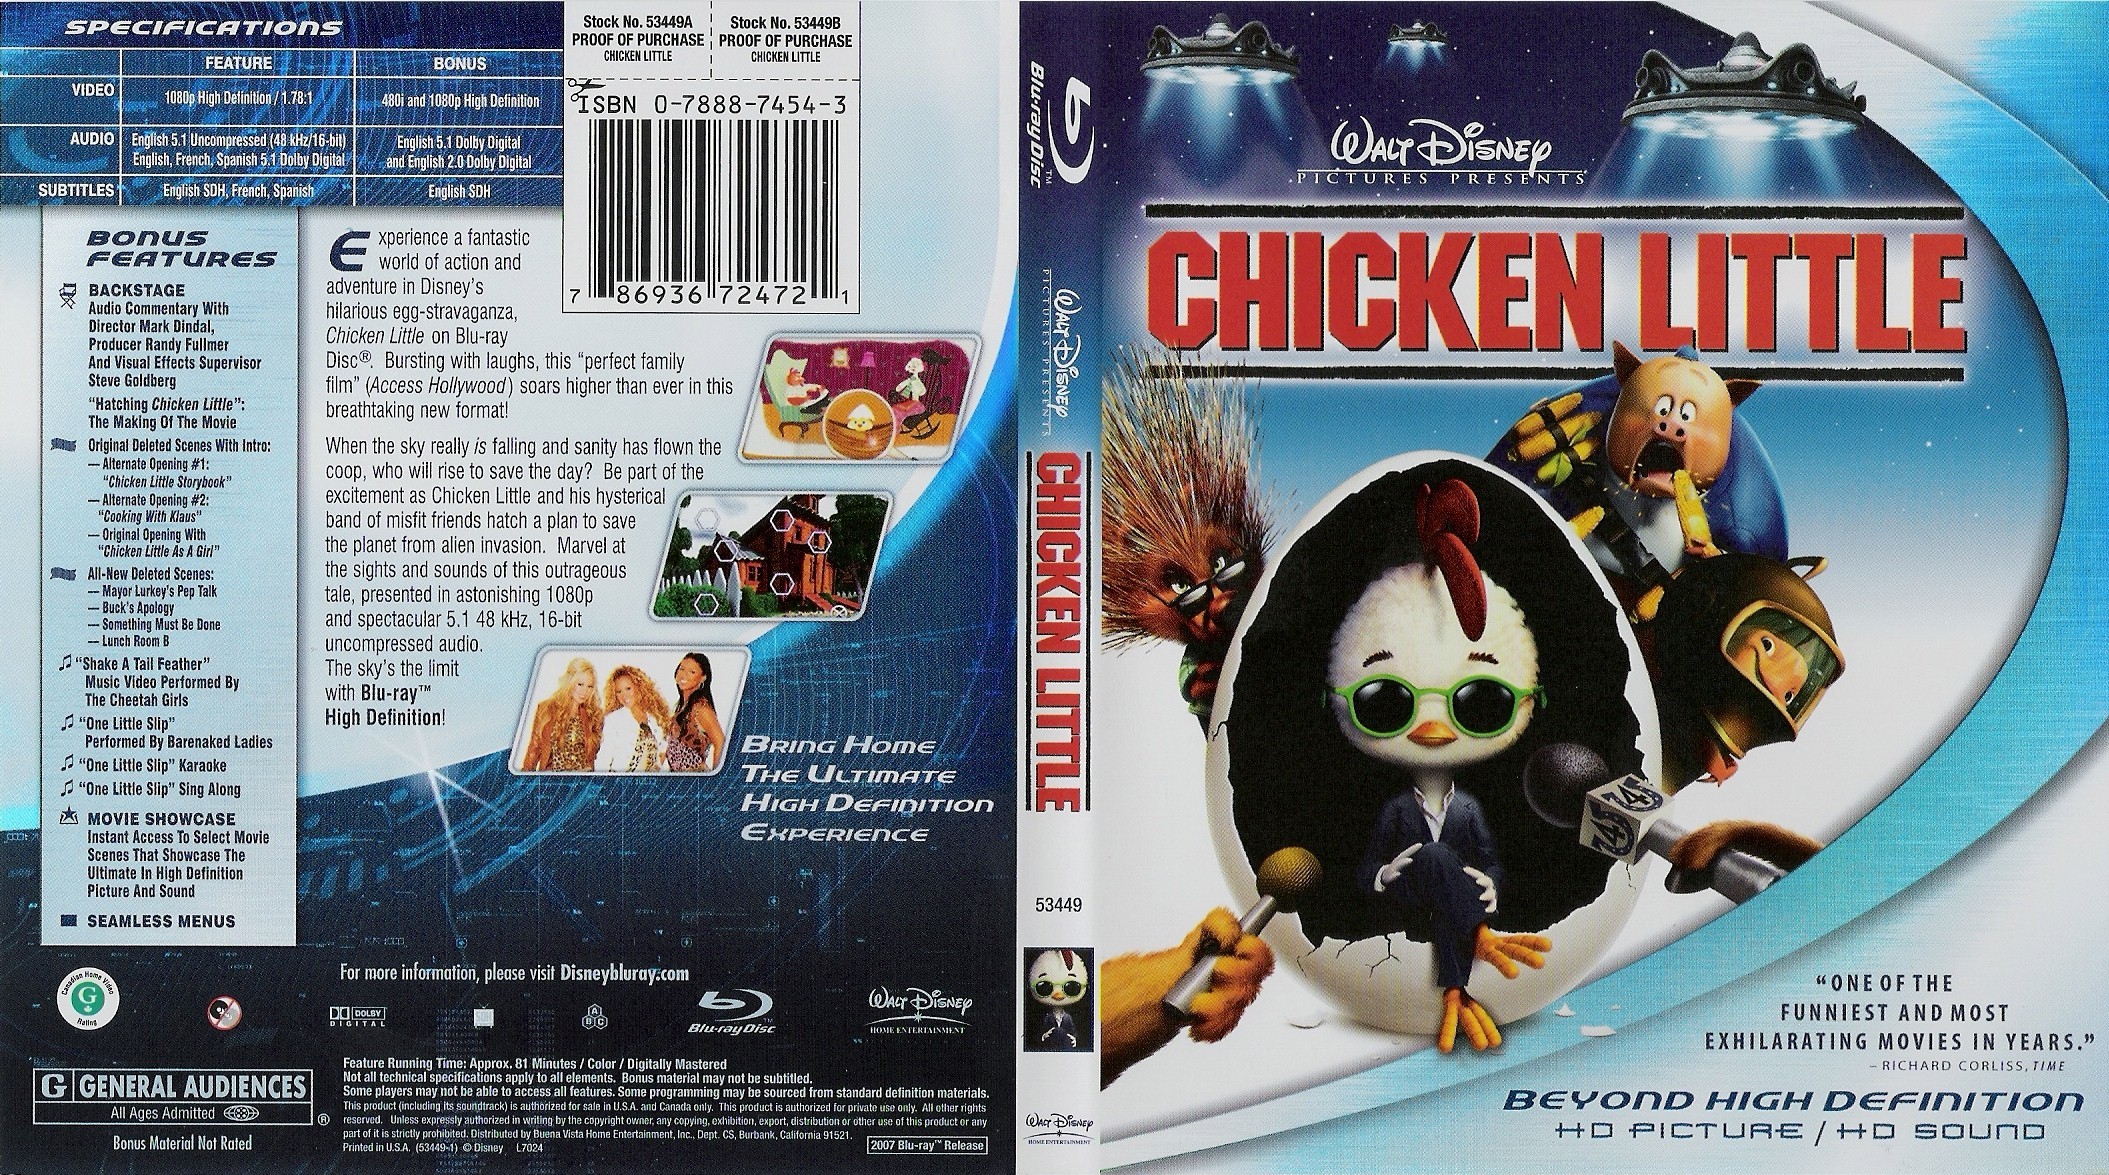 Jaquette DVD Petit poulet - Chicken little (Canadienne) (BLU-RAY)